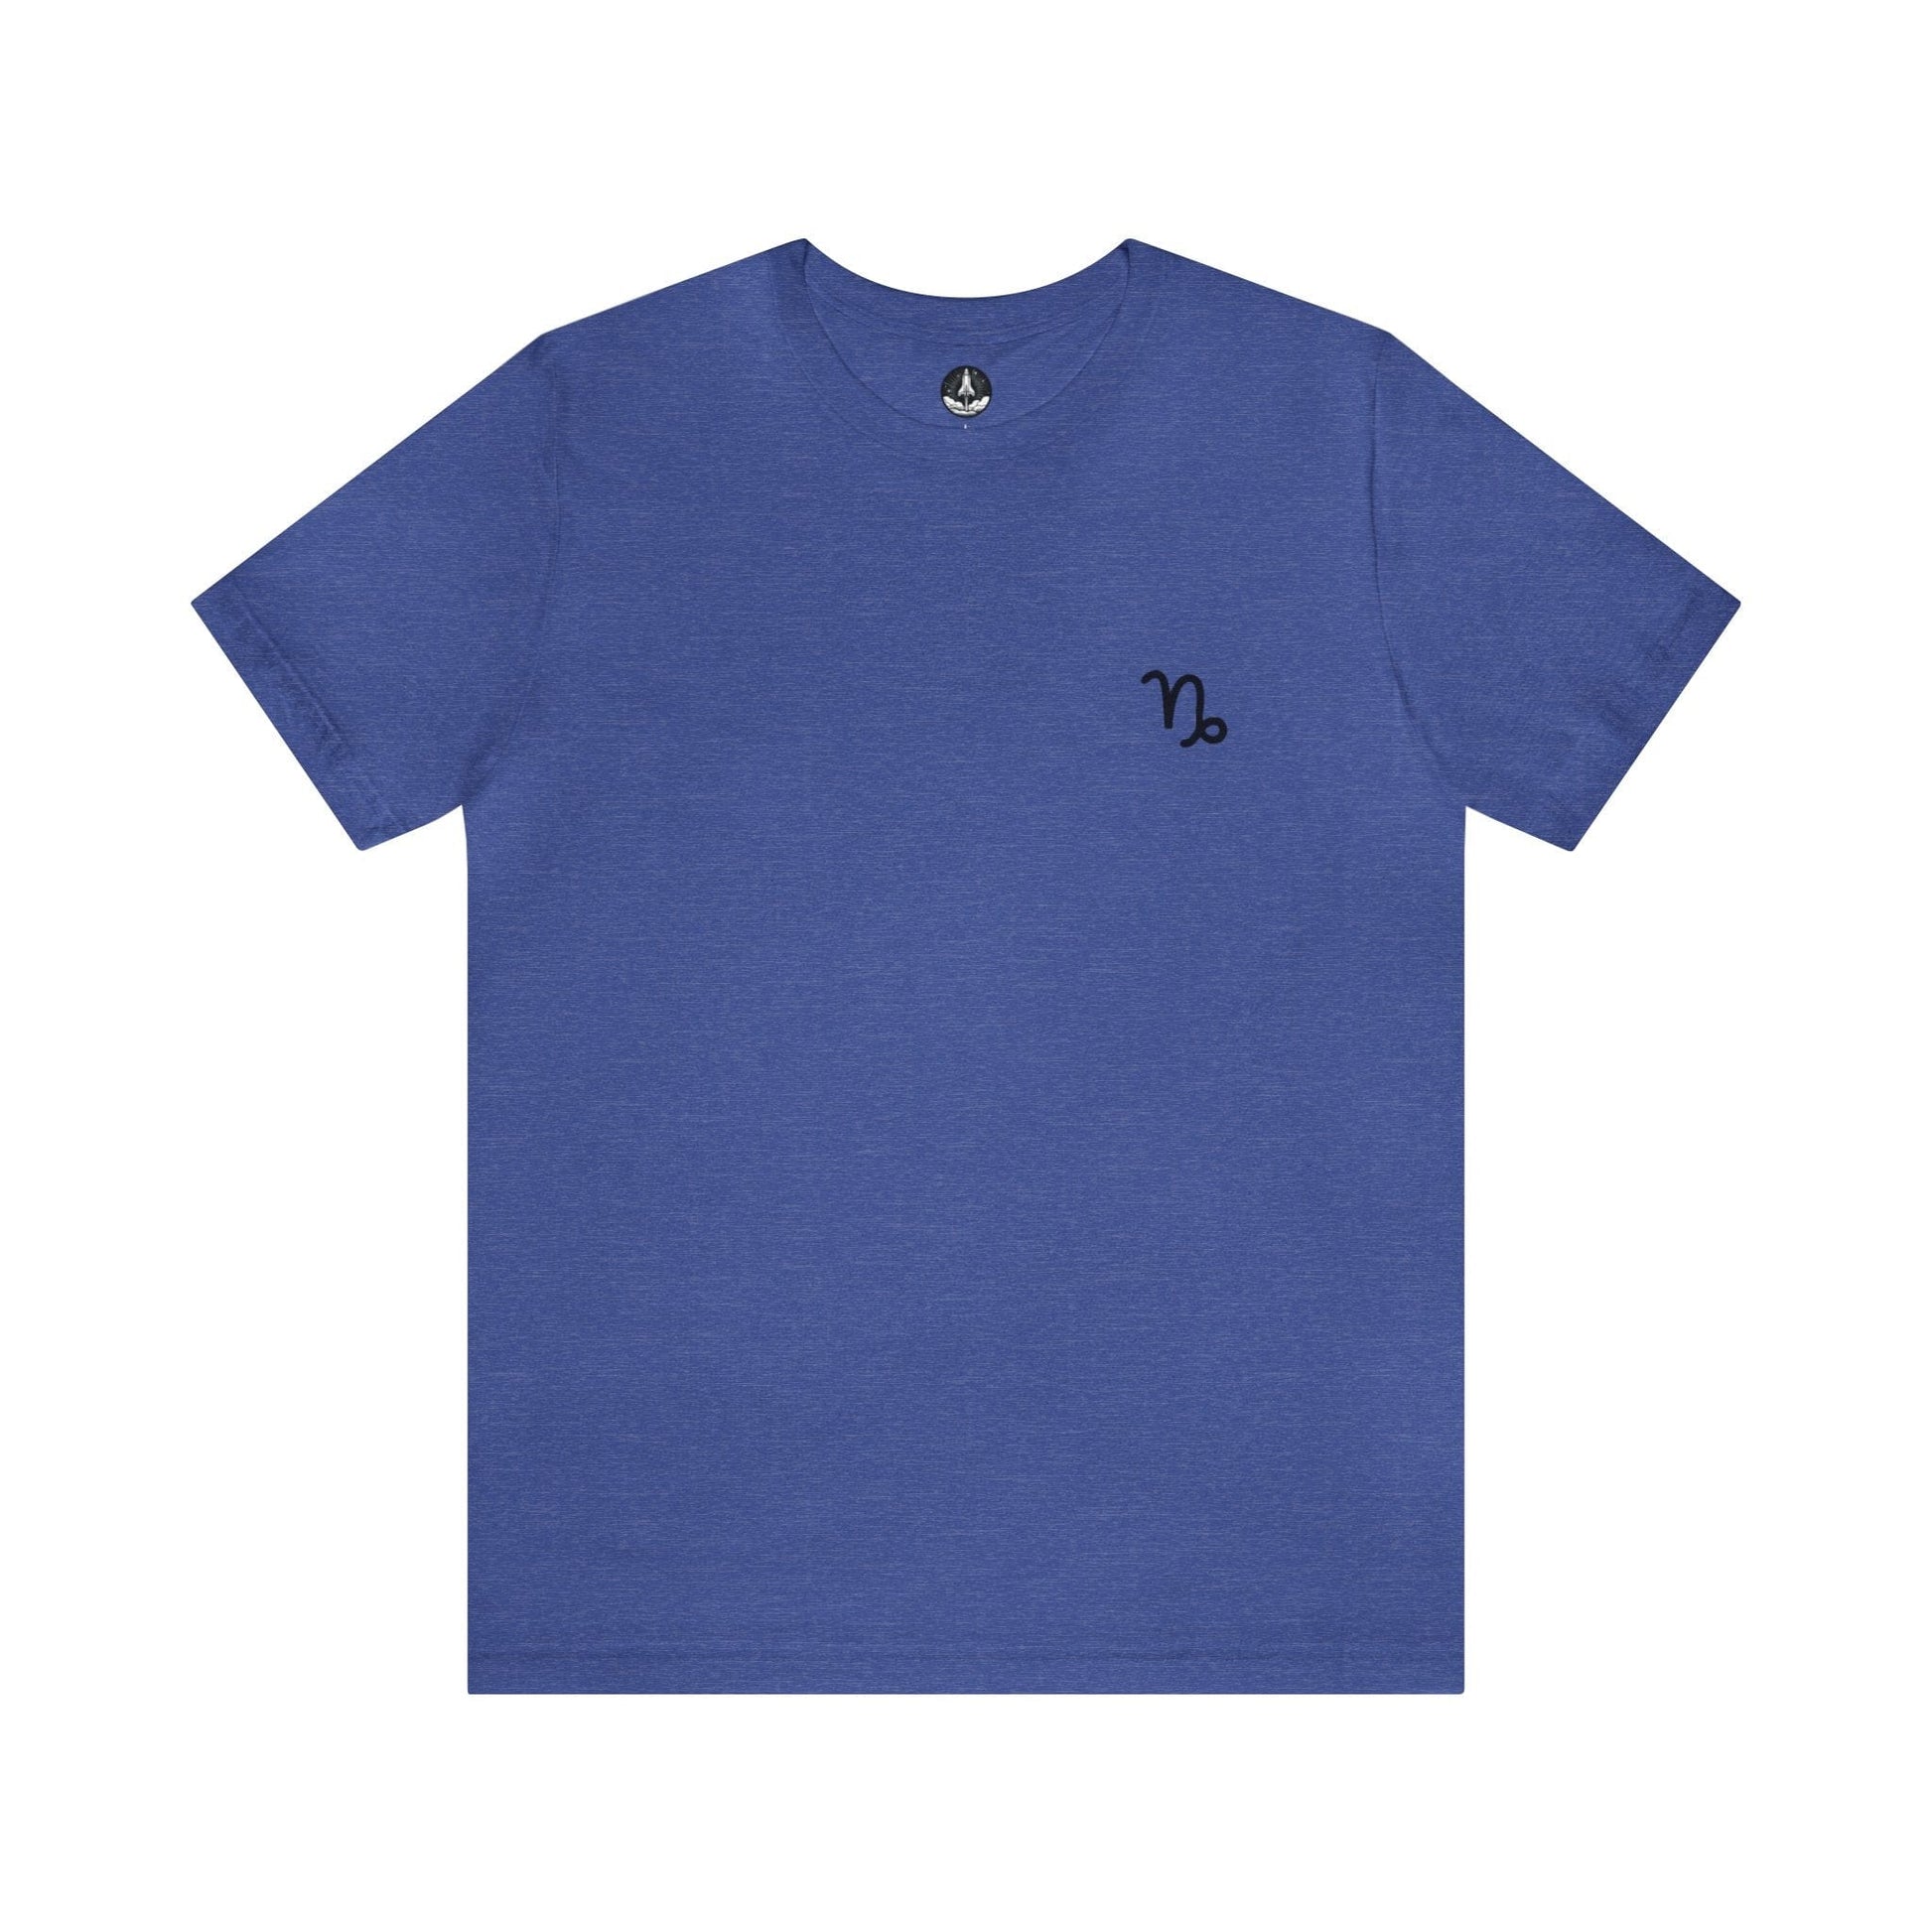 T-Shirt Heather True Royal / S Capricorn Mountain Glyph T-Shirt: Peak Style for the Determined Climber